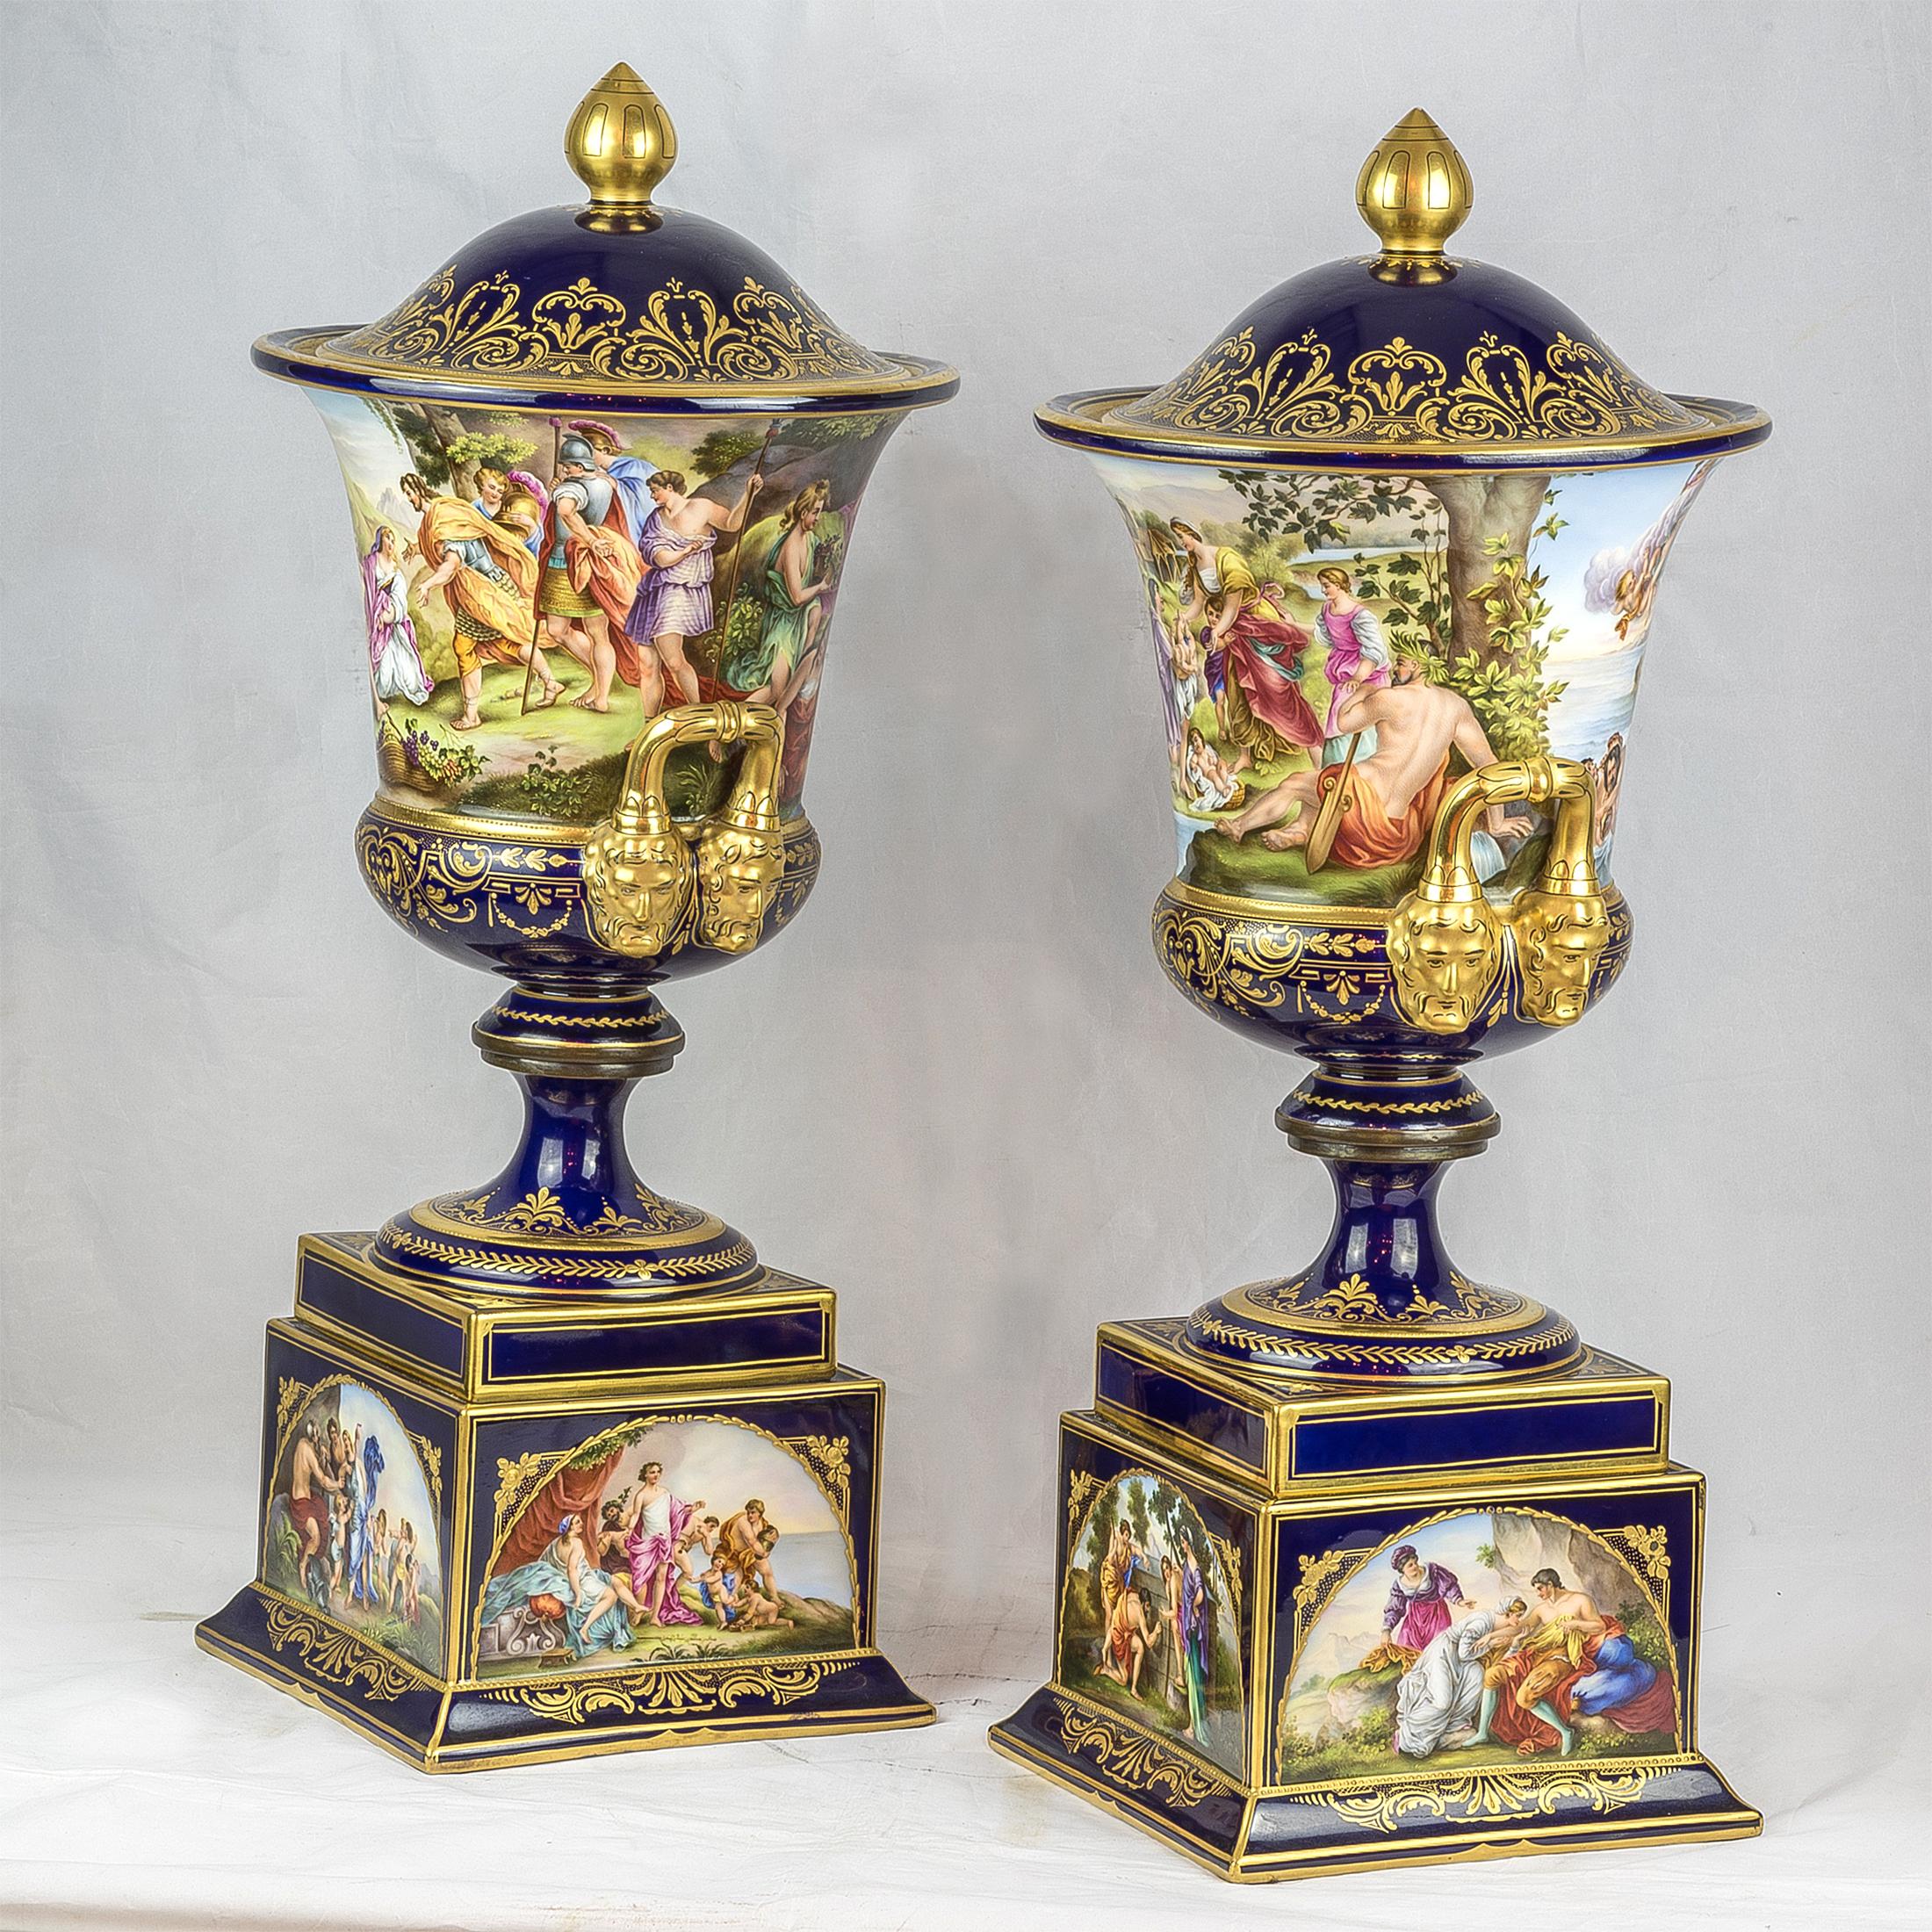 A very fine pair of Vienna cobalt blue porcelain covered urns with male mask handles. Each covered urns and covers; cobalt blue ground; loop handles terminating at classical male mask heads; allegorical figures titled under the base of one Romulus